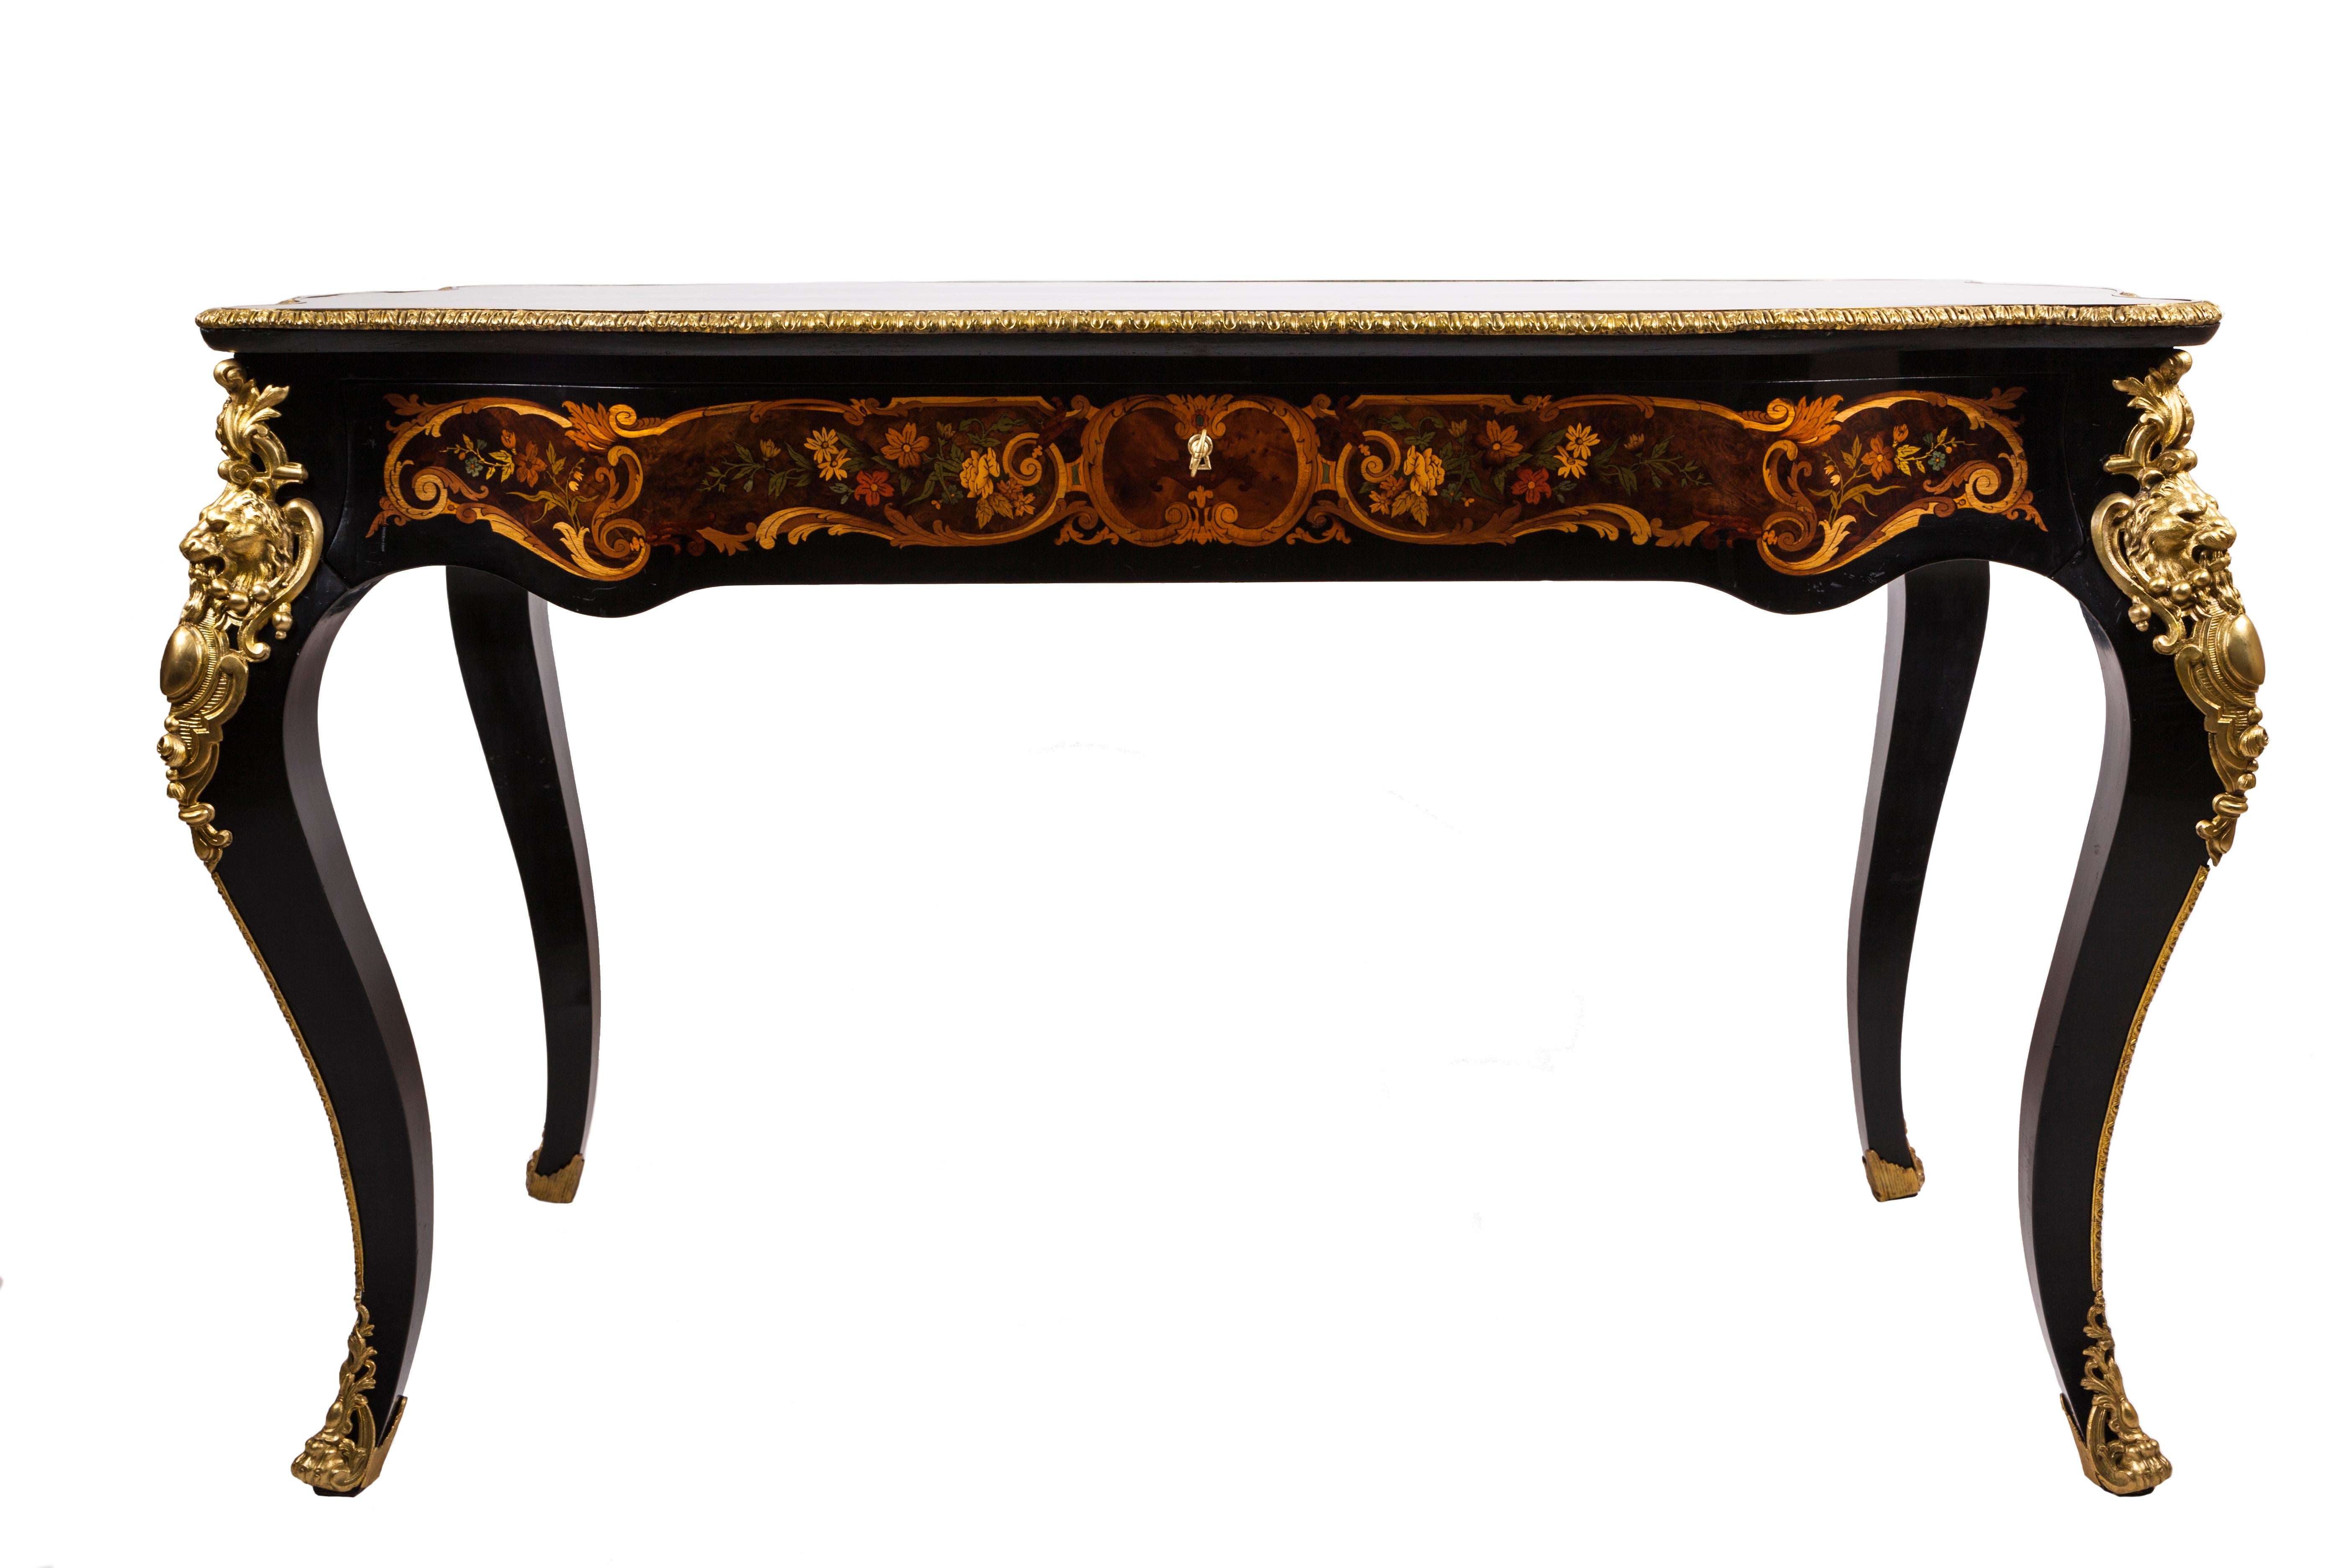 France, 19th century. Napoleon III writing table with a beautiful serpentine shape, inlaid with precious polychrome woods, supported by four cabriole legs, enriched with gilded bronze decorations.
In perfect conditions, restored and finished with